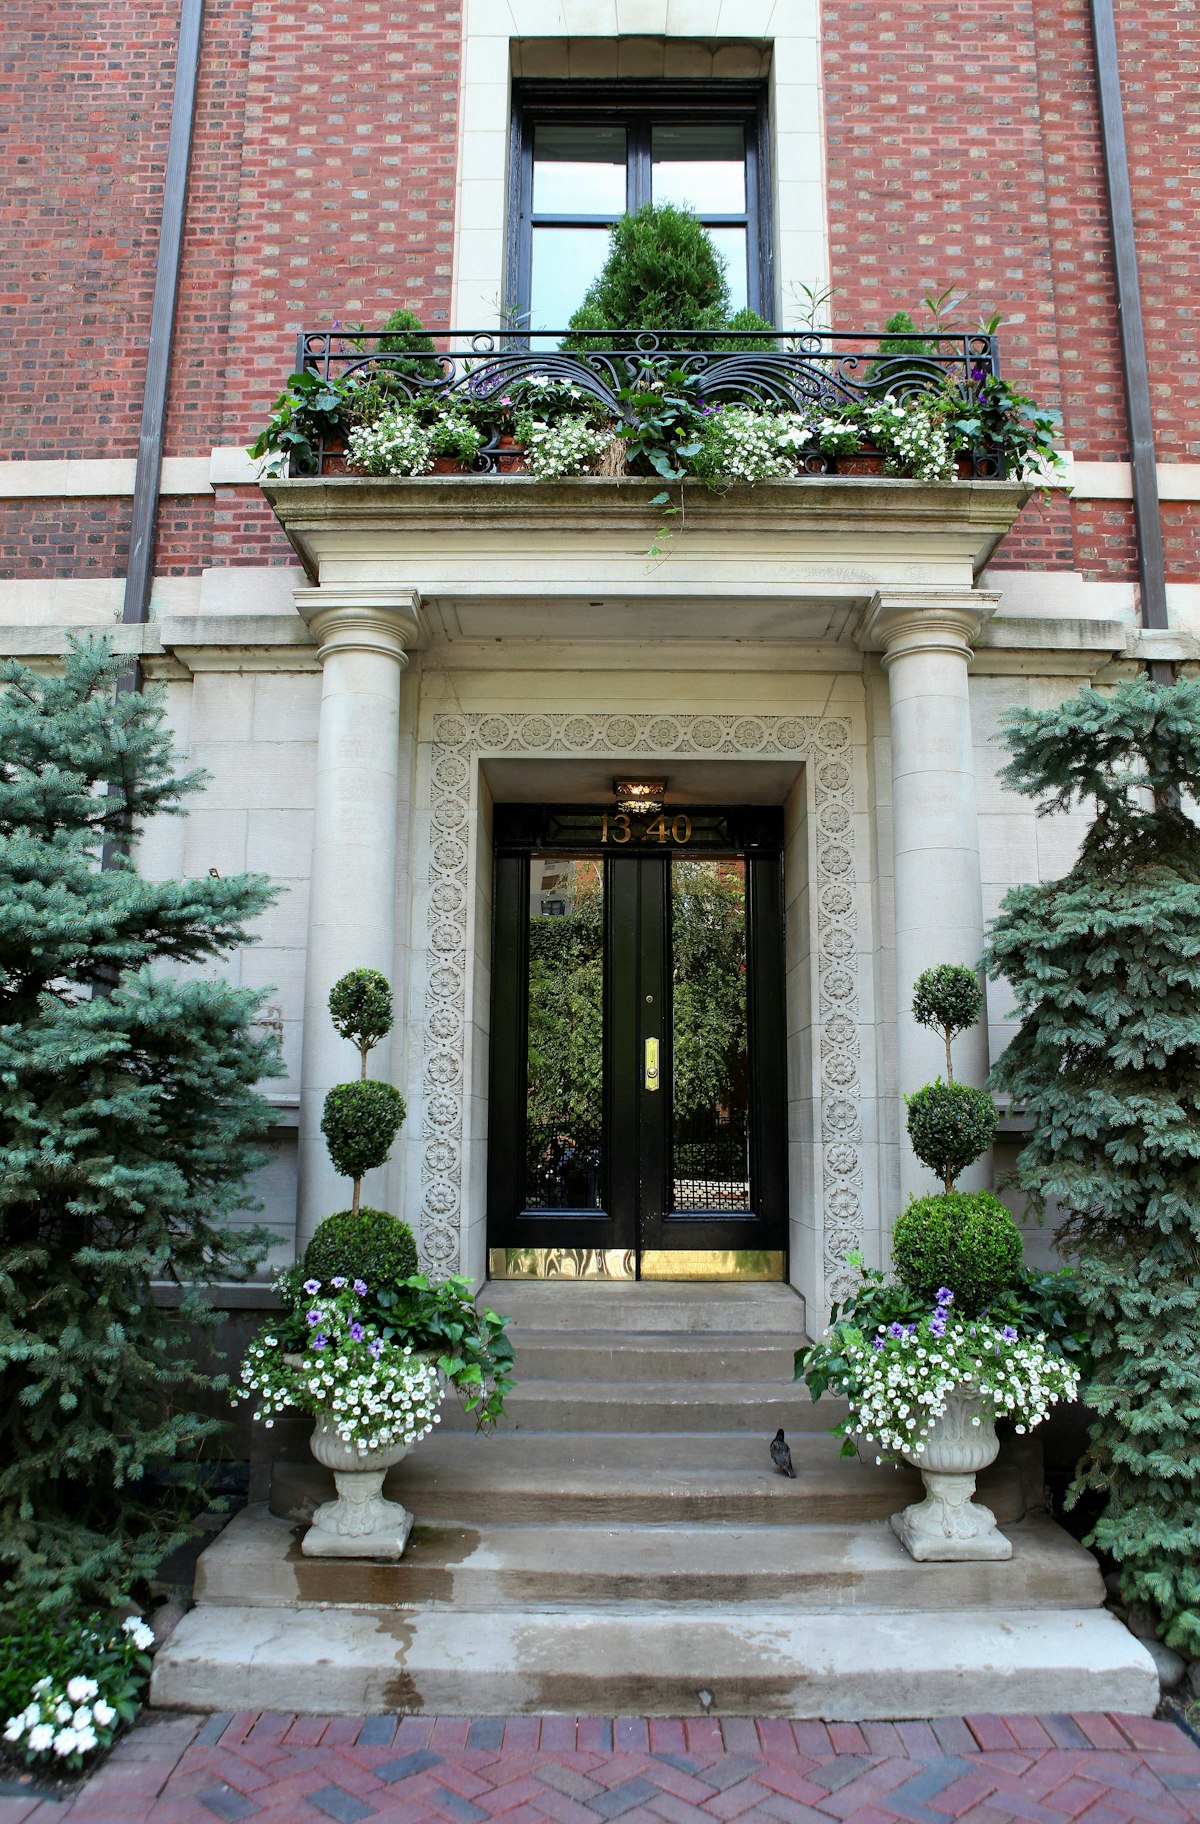 CHICAGO - JULY 21:  Front door of the original Playboy Mansion in Chicago's Gold Coast, in Chicago, Illinois on JULY 21, 2013.  (Photo By Raymond Boyd/Getty Images)...